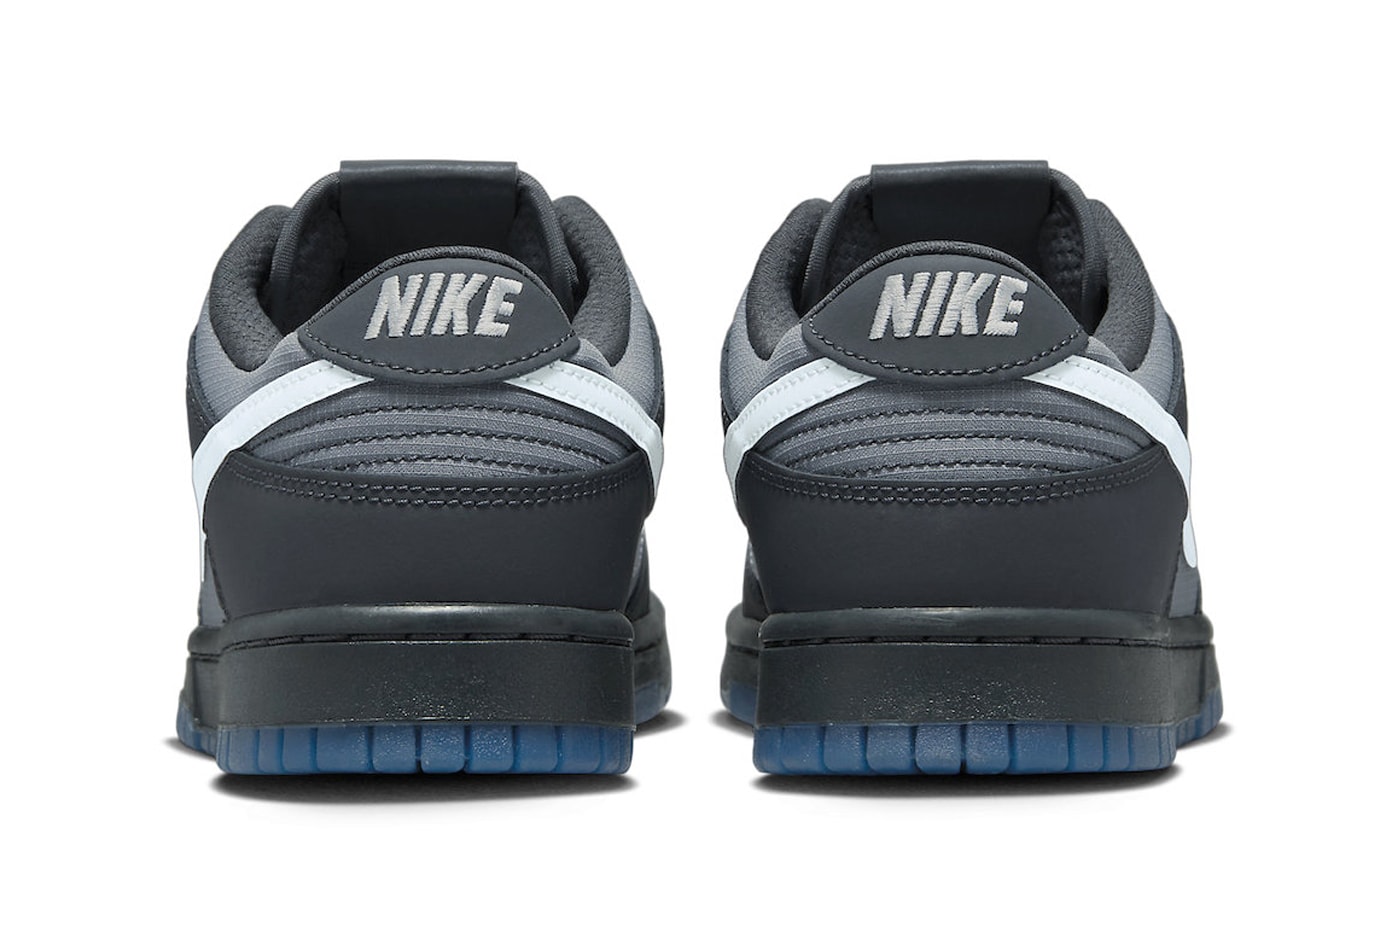 Nike Dunk Low Arrives in "Anthracite" and Reflective Swooshes FV0384-001 release info swoosh Pure Platinum-Cool Grey